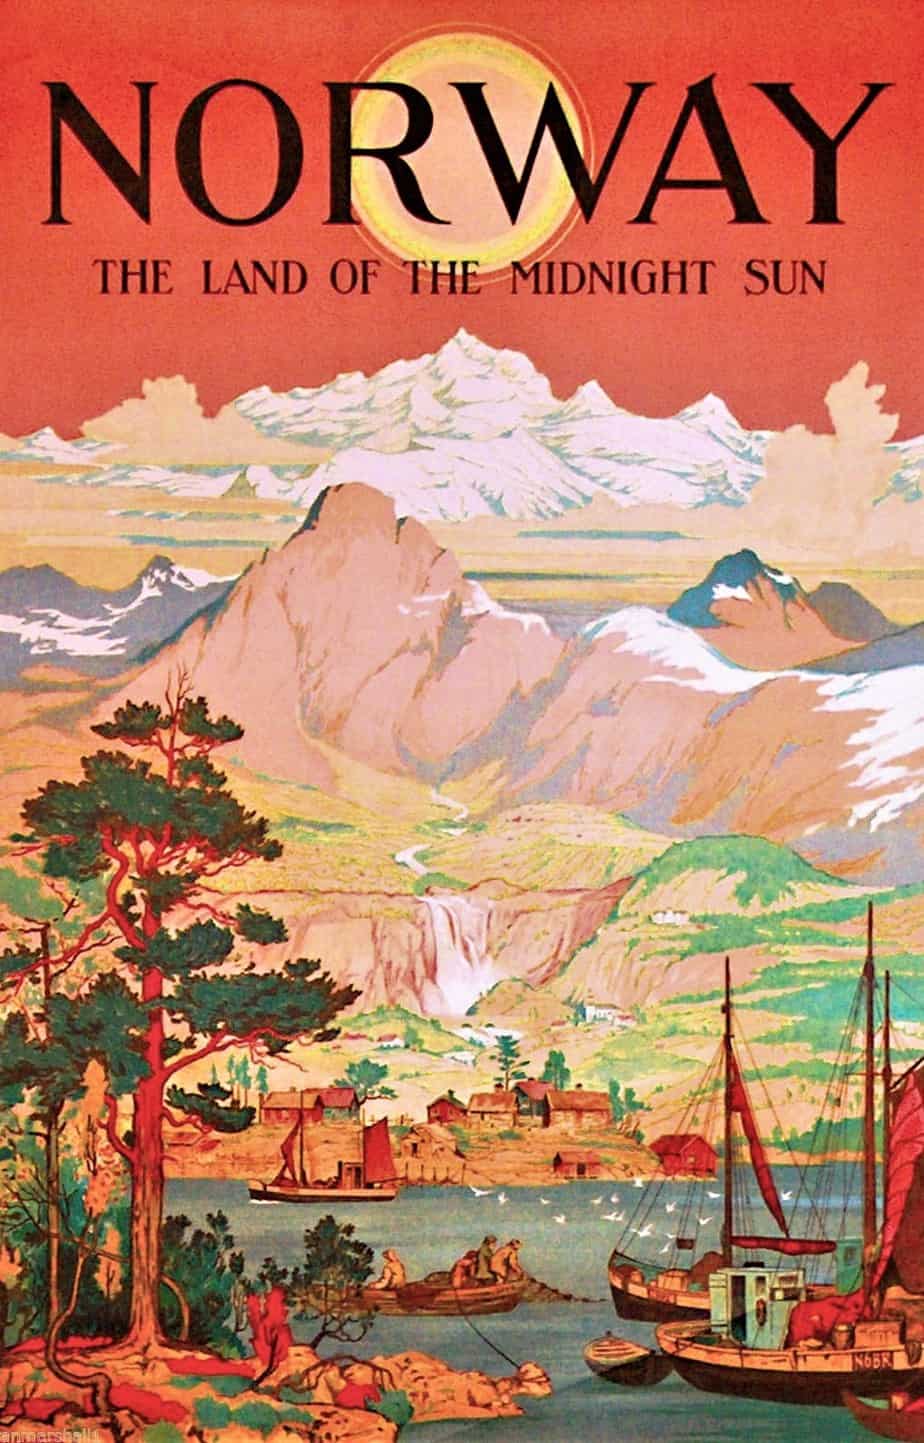 Ivar Gull circa 1930 The Land Of The Midnight Sun travel poster illustration promoting Norway